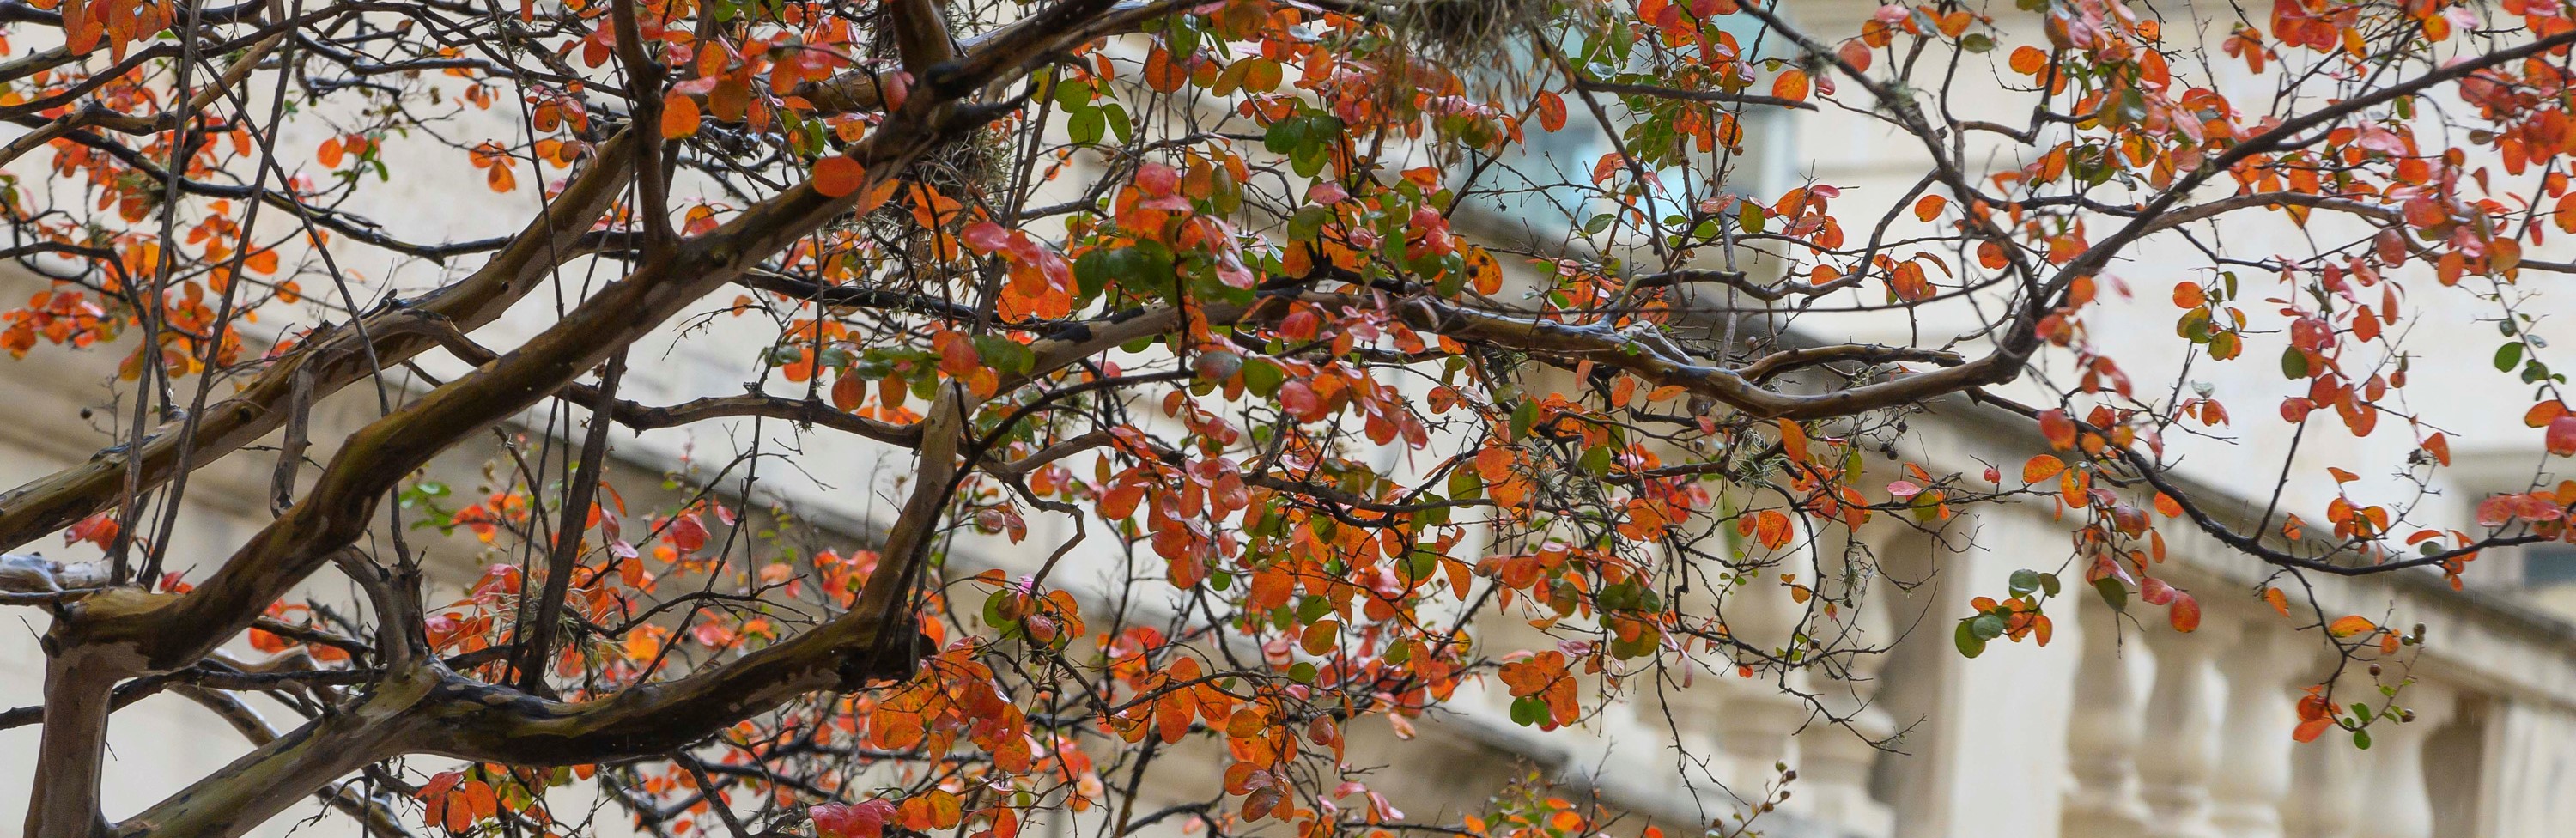 Tree with fall colored leaves